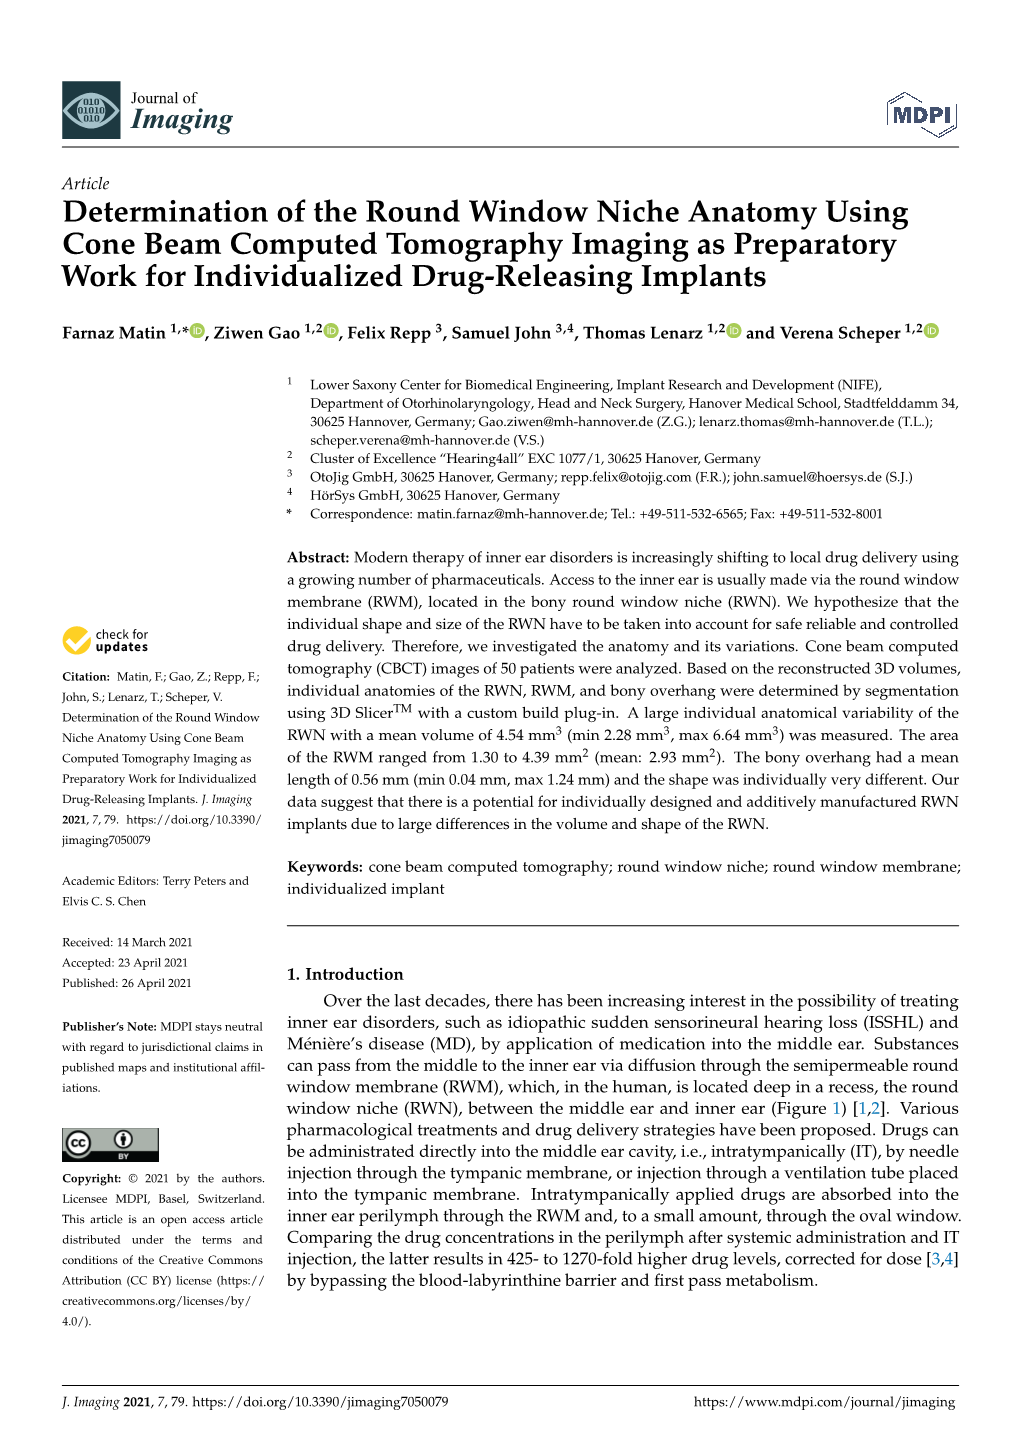 Determination of the Round Window Niche Anatomy Using Cone Beam Computed Tomography Imaging As Preparatory Work for Individualized Drug-Releasing Implants